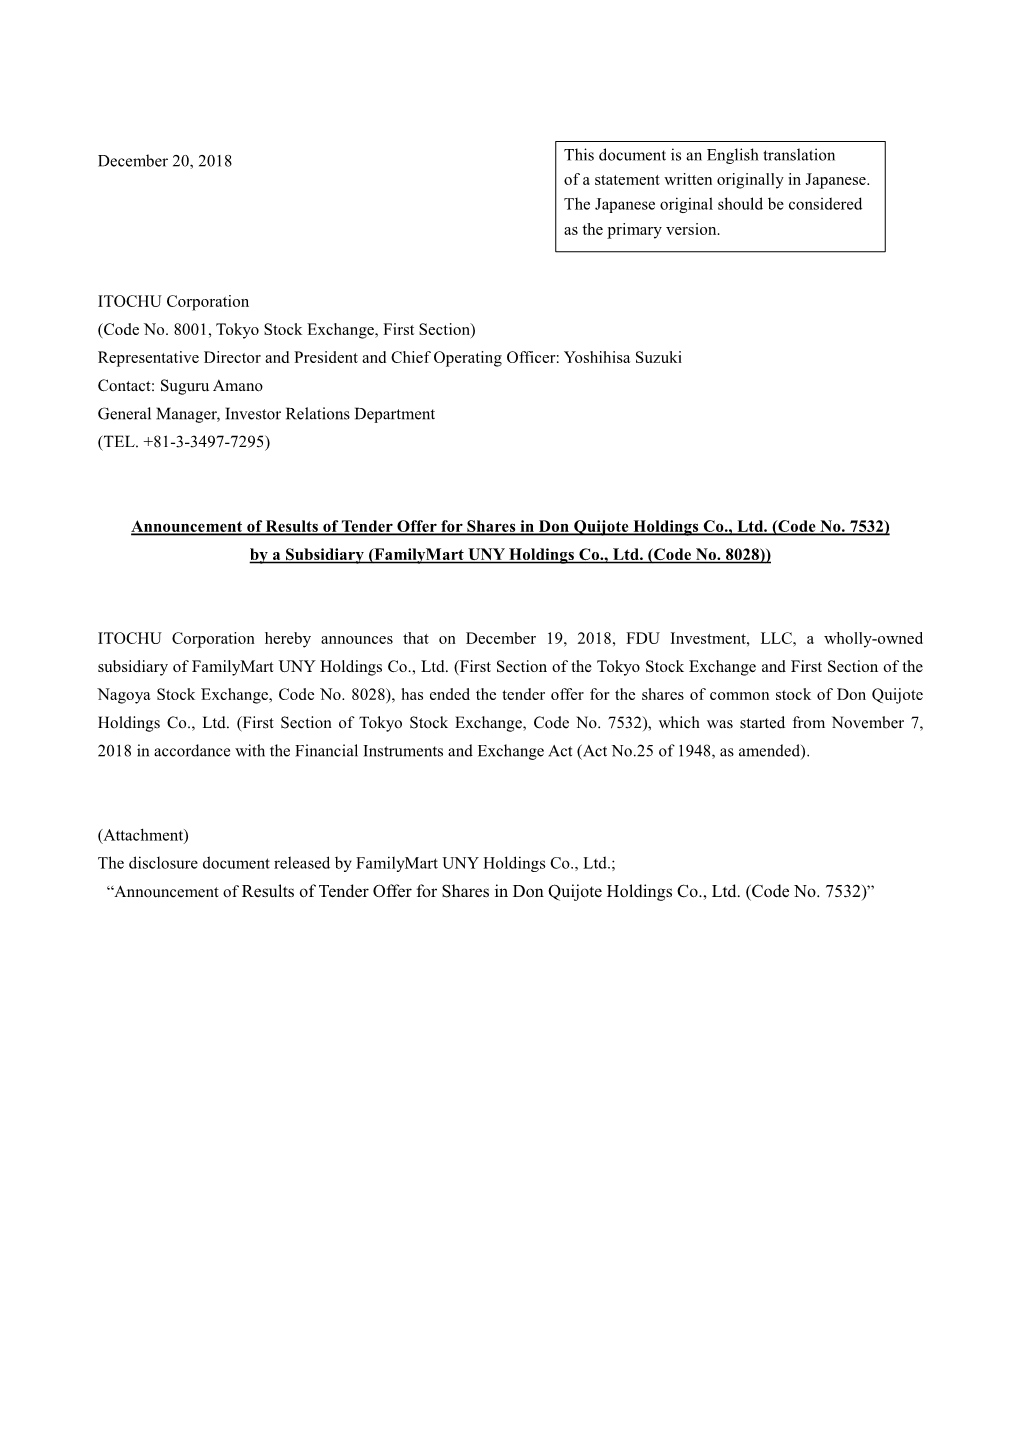 “Announcement of Results of Tender Offer for Shares in Don Quijote Holdings Co., Ltd. (Code No. 7532)”